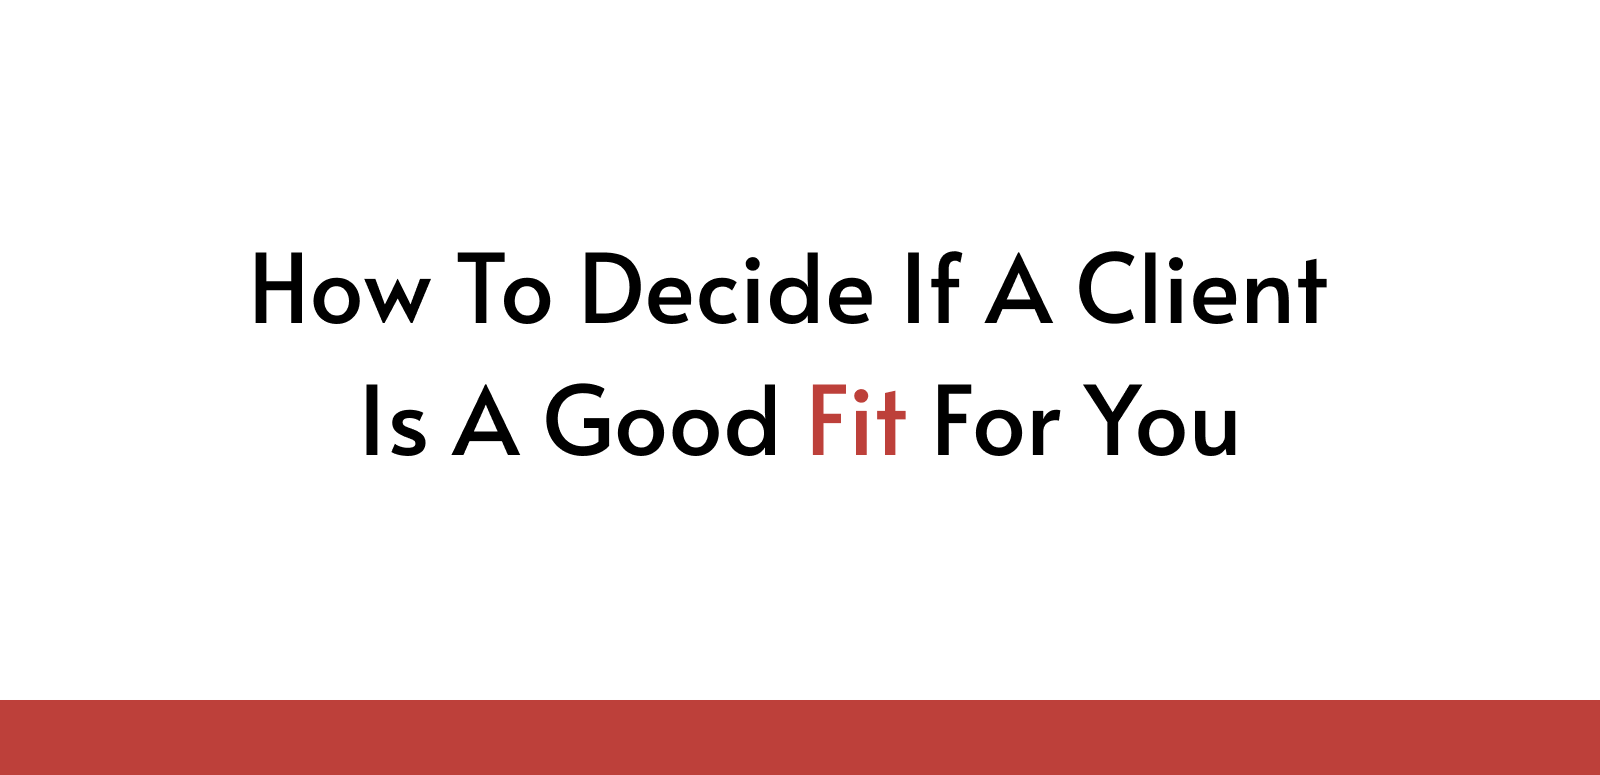 How To Decide If A Client Is A Good Fit For You